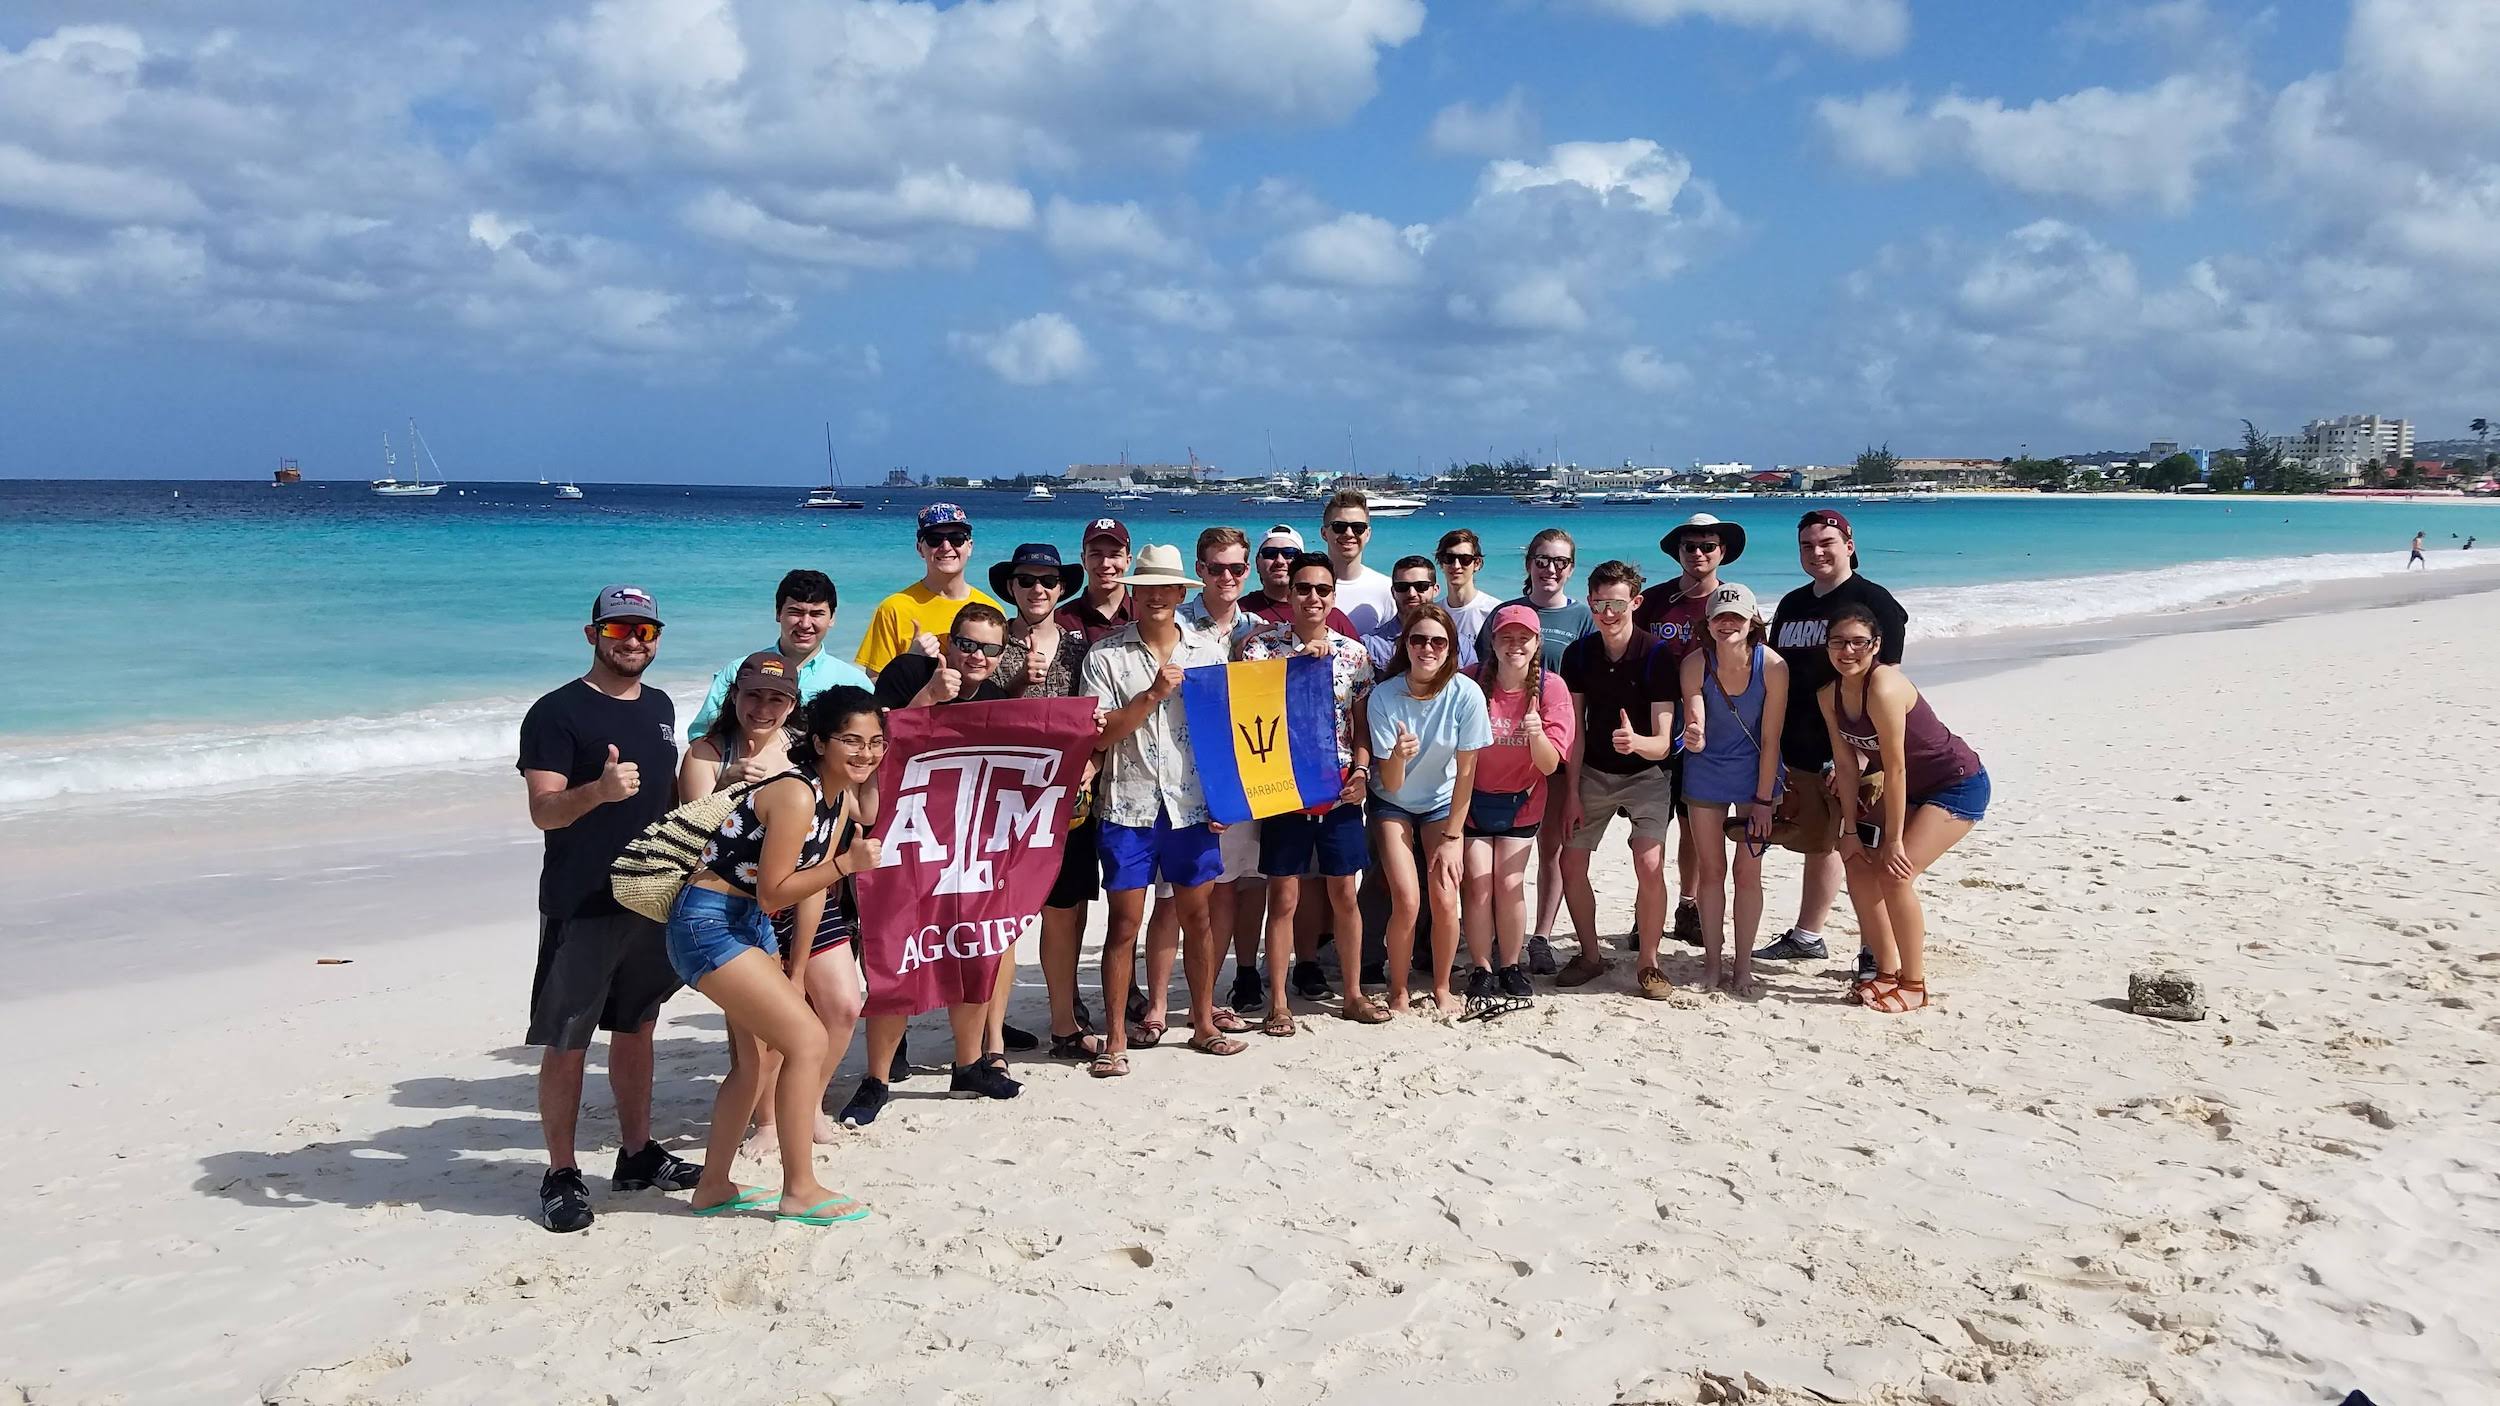 Texas A&M University Students in Barbados